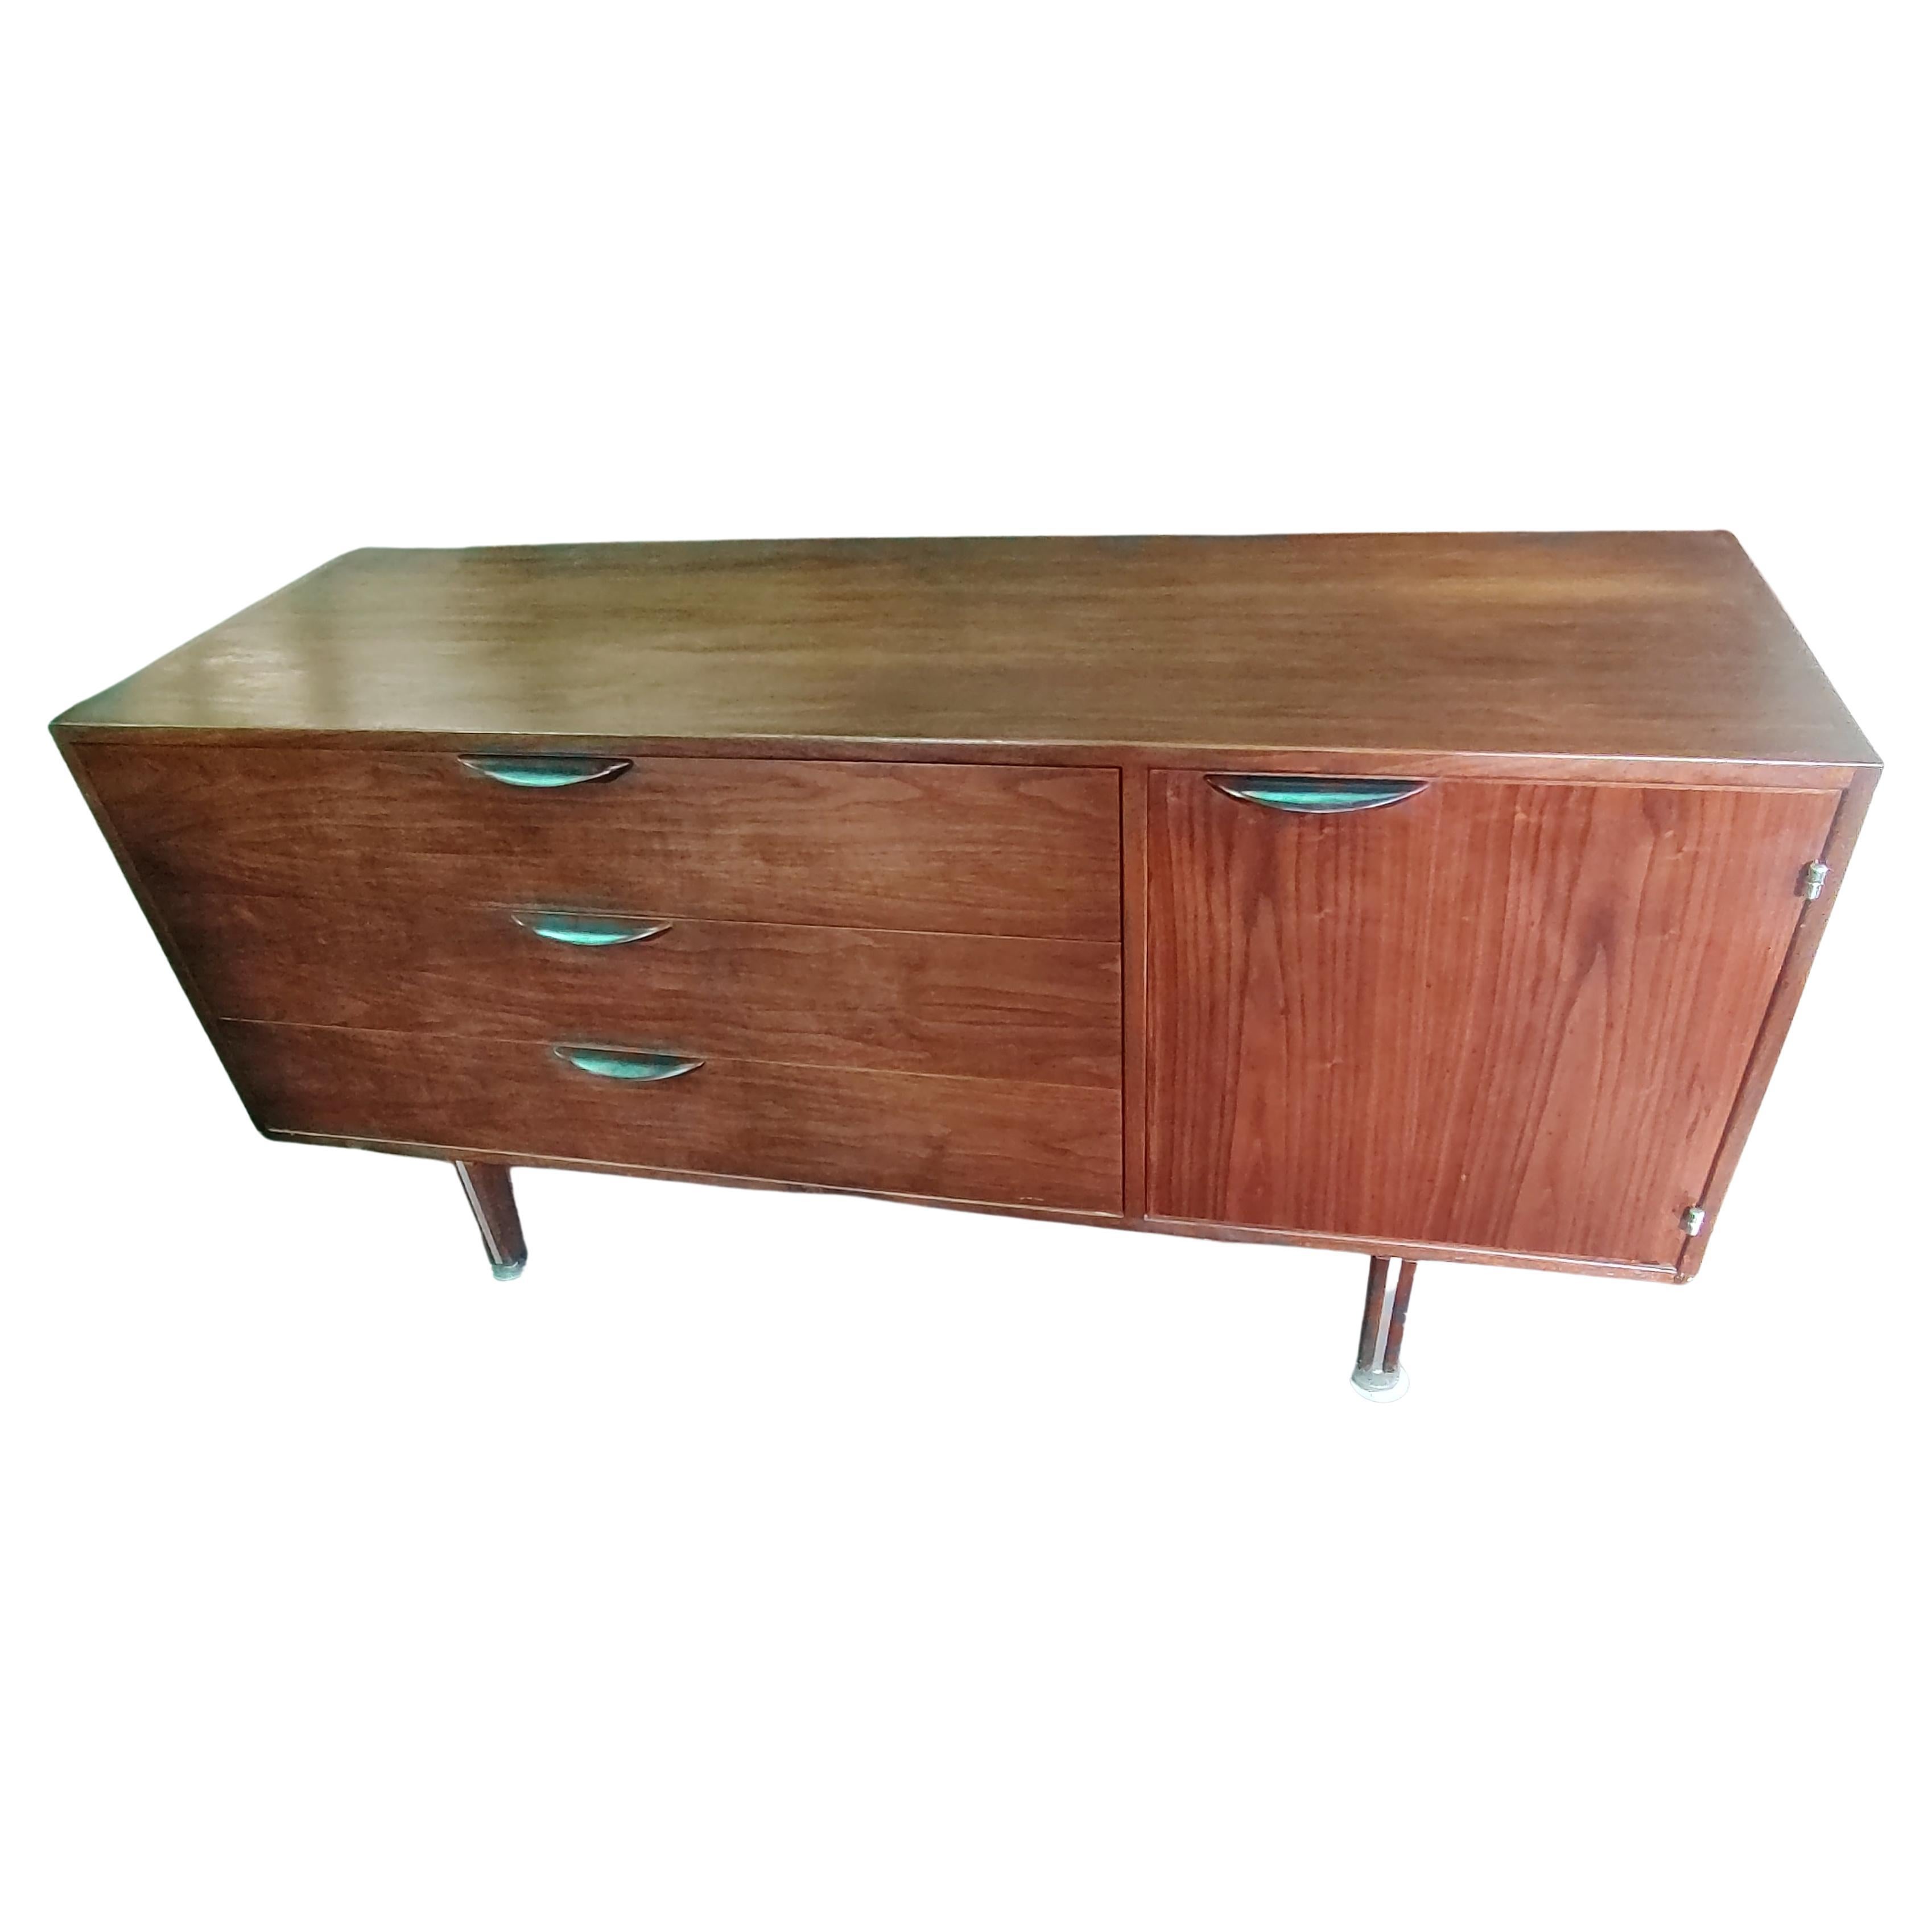 Mid-Century Modern Walnut W Aluminum Inlay Credenza by Jens Risom In Good Condition For Sale In Port Jervis, NY